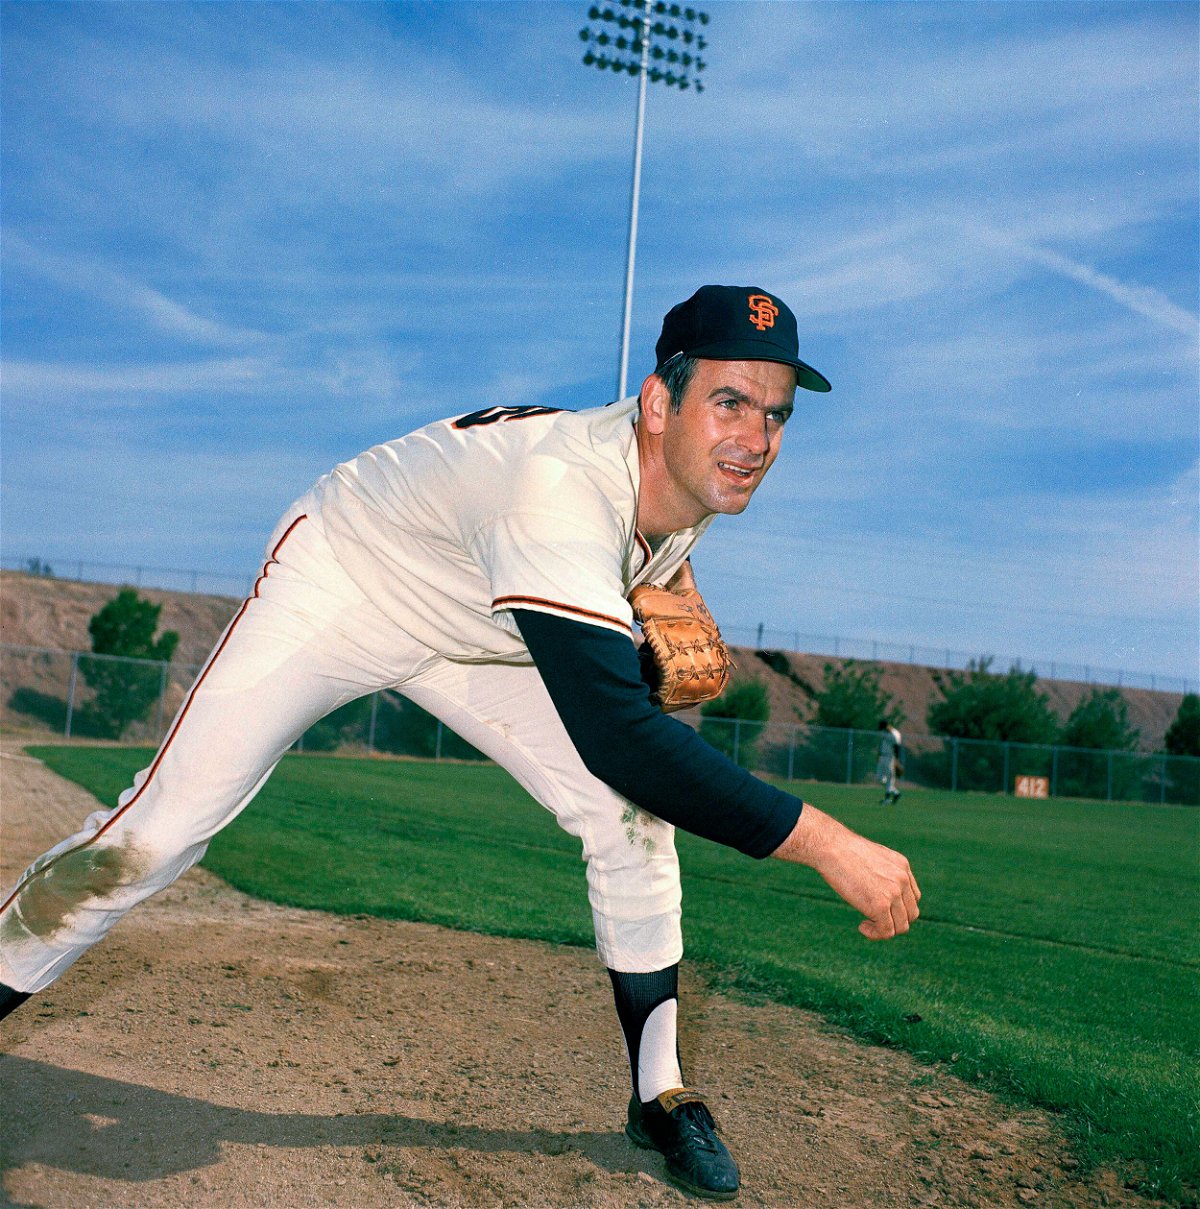 <i>Robert H. Houston/AP</i><br/>Baseball Hall of Famer Gaylord Perry -- pictured here with the San Francisco Giants in 1970 -- has died at the age of 84.